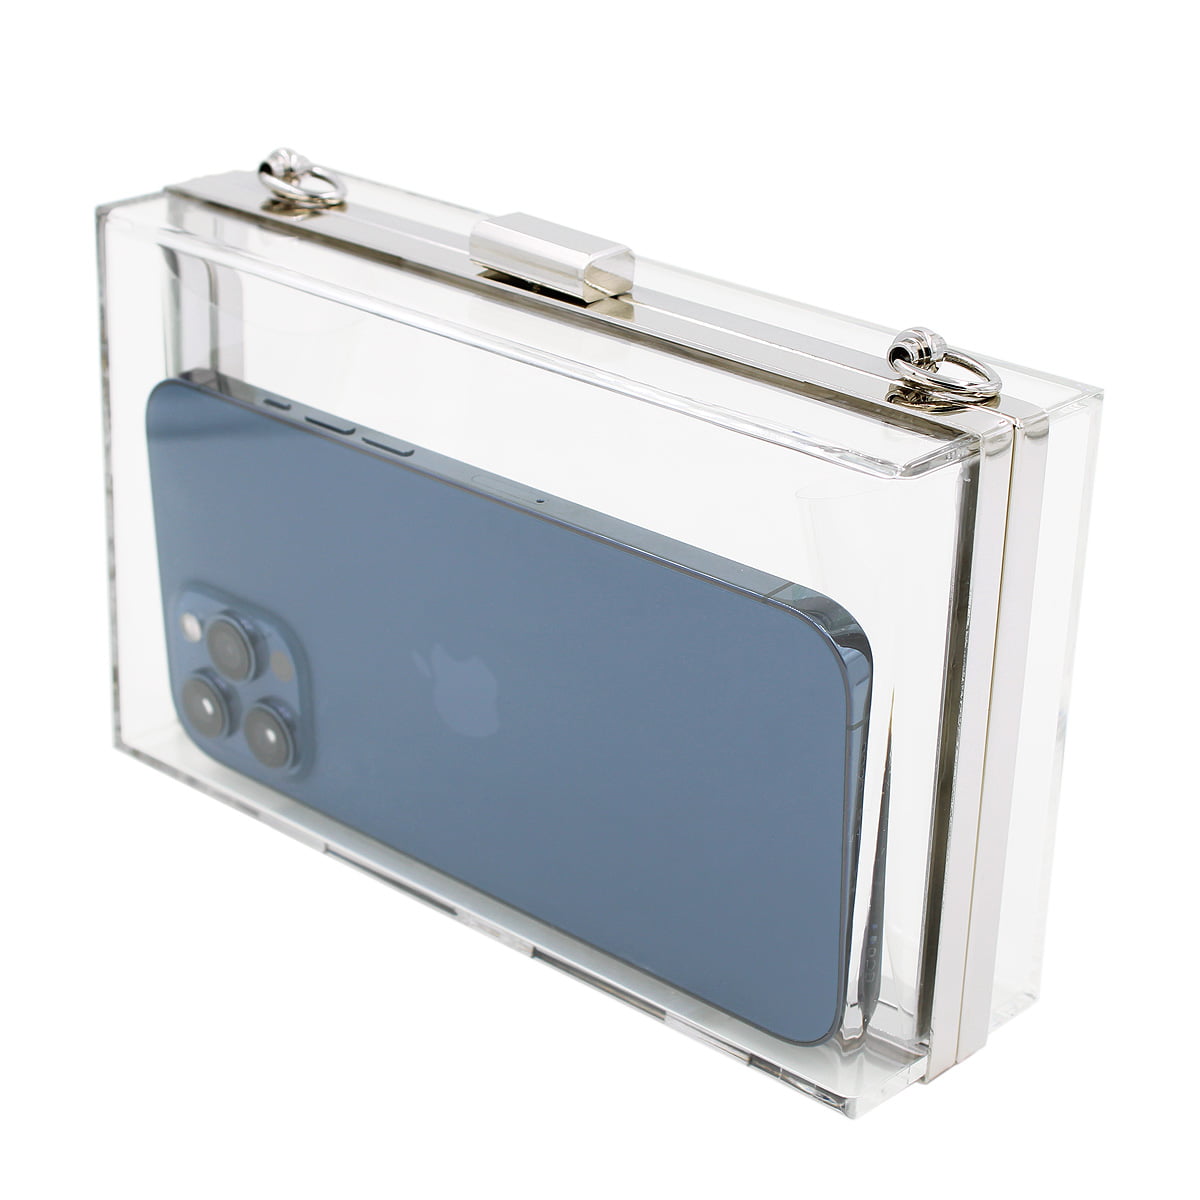 Clear Acrylic Hand Bags For Women Metal Handle Lock Square Box